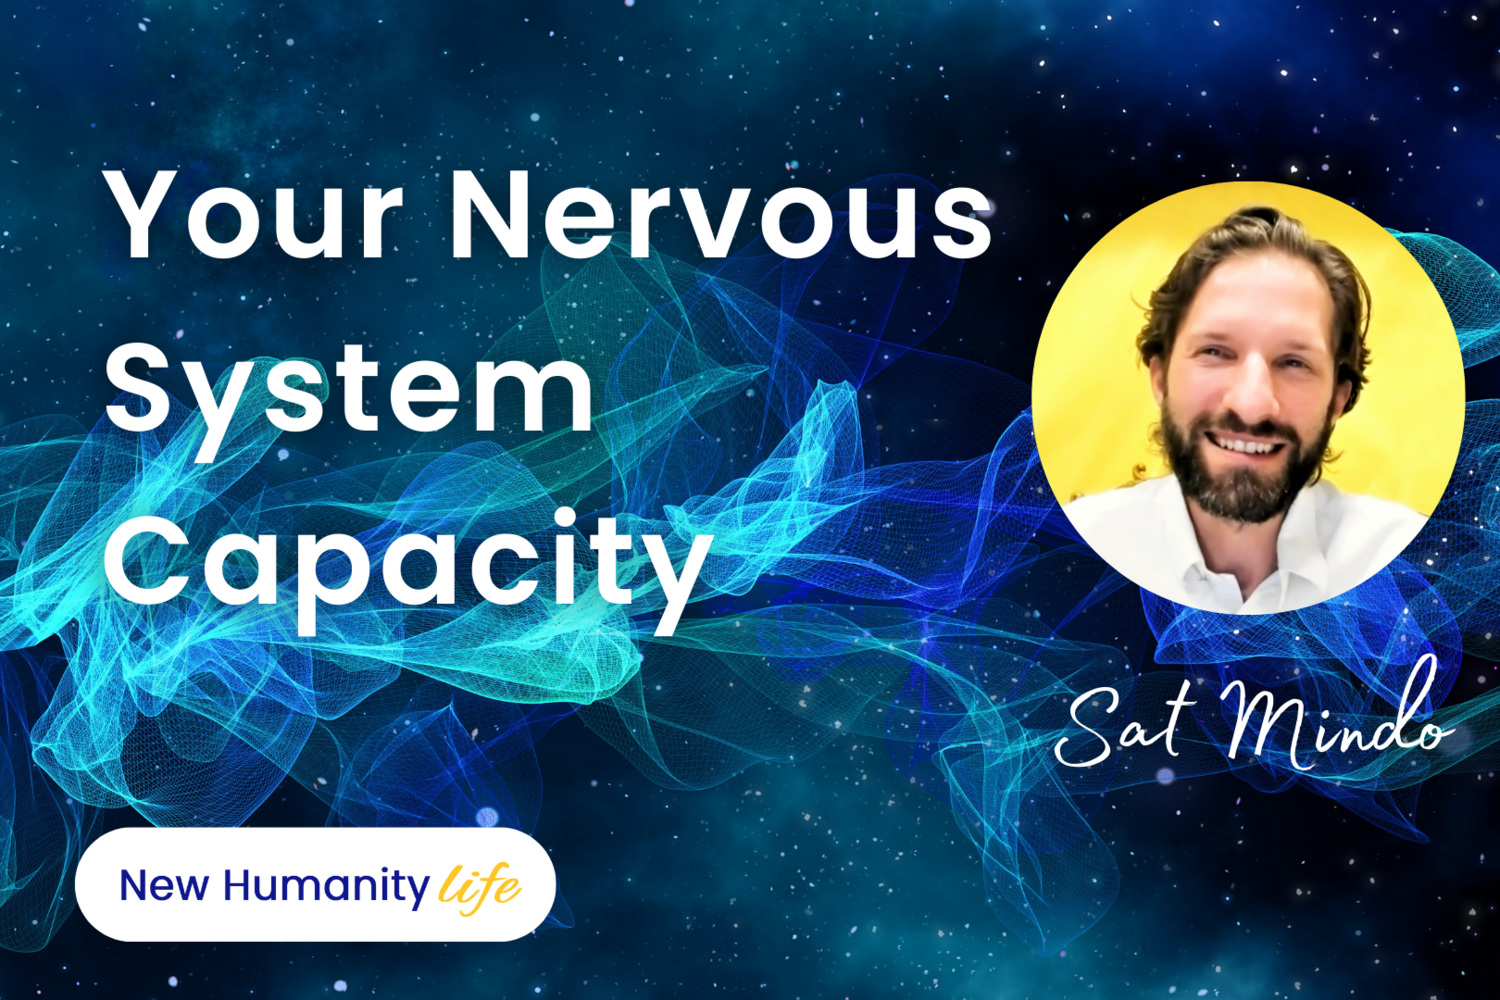 Your Nervous System Capacity Determines Your Ability to Sustain a High Vibration